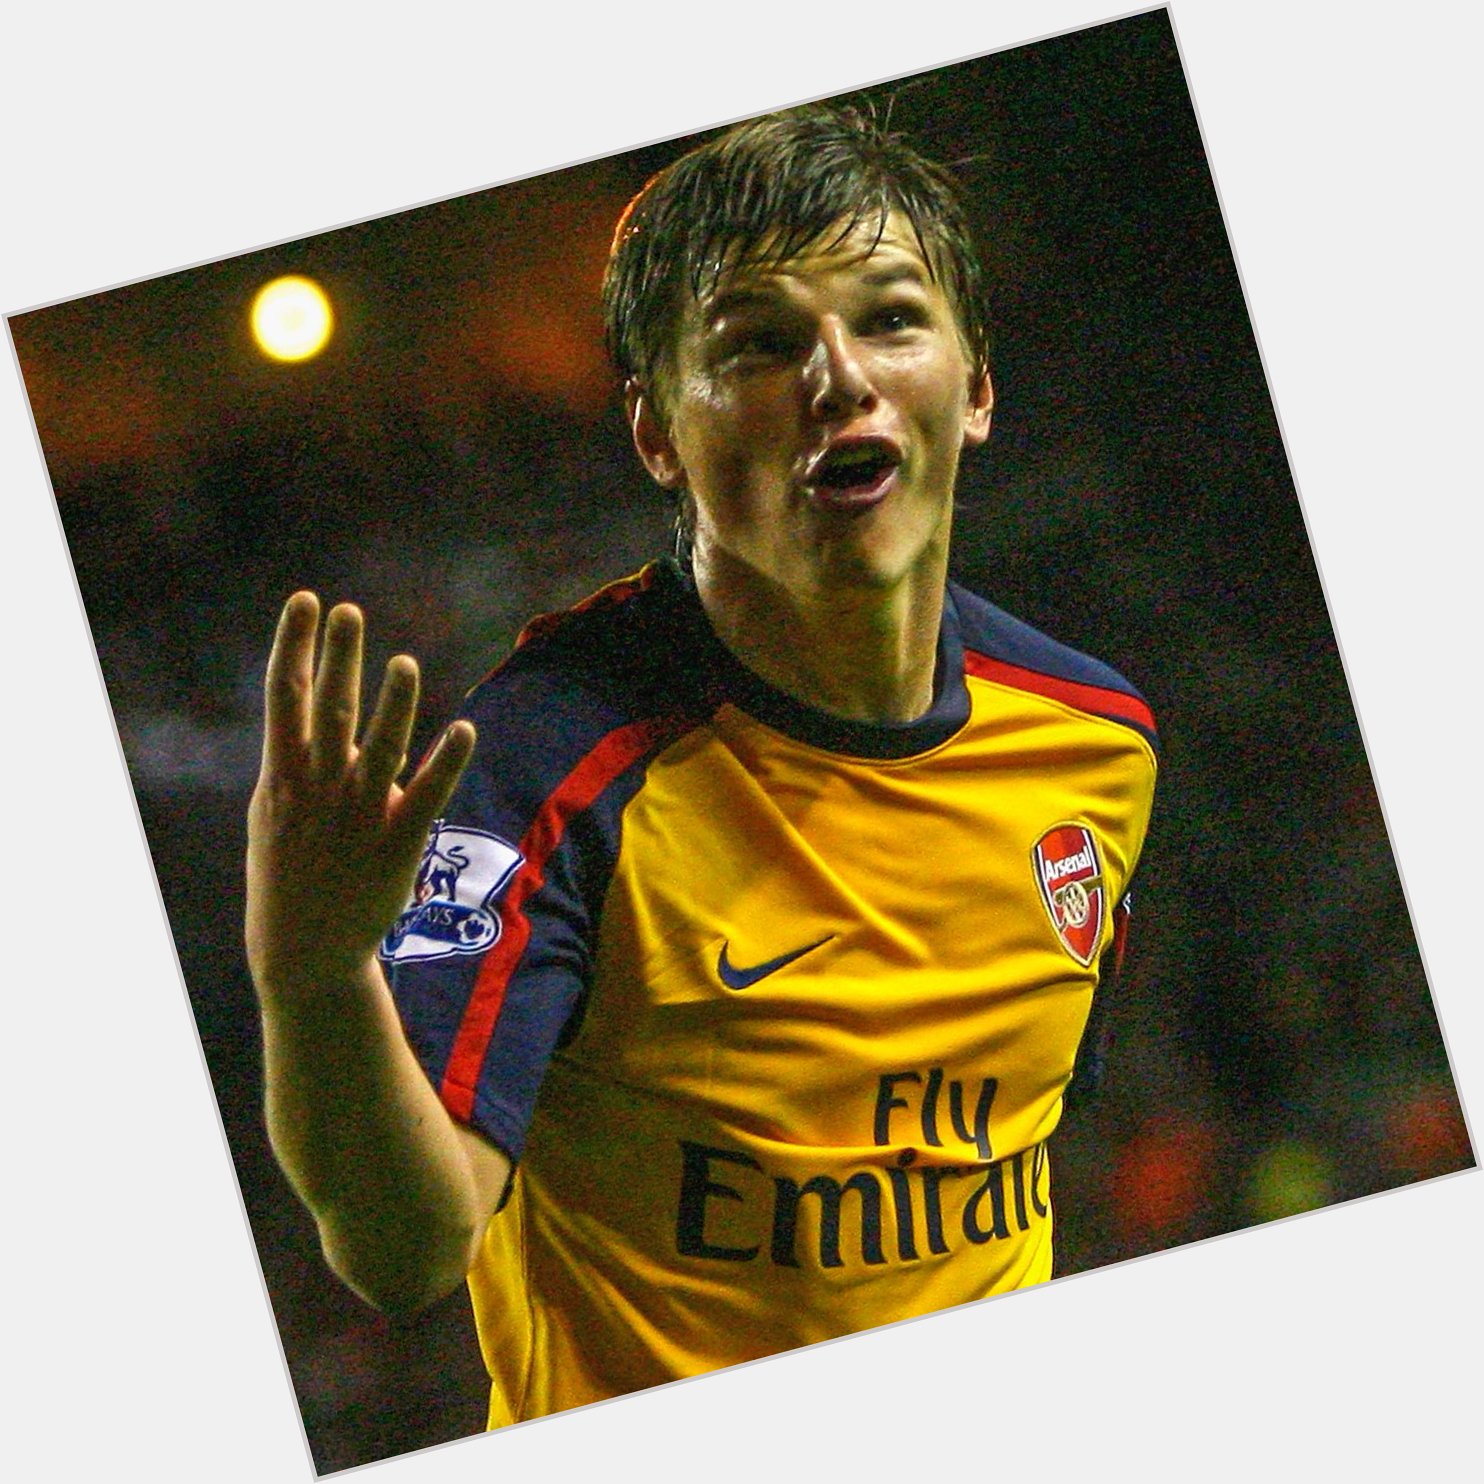 Happy 34th birthday Andrei Arshavin! 

Arsenal fans will always remember the night he scored 4 at Liverpool. 